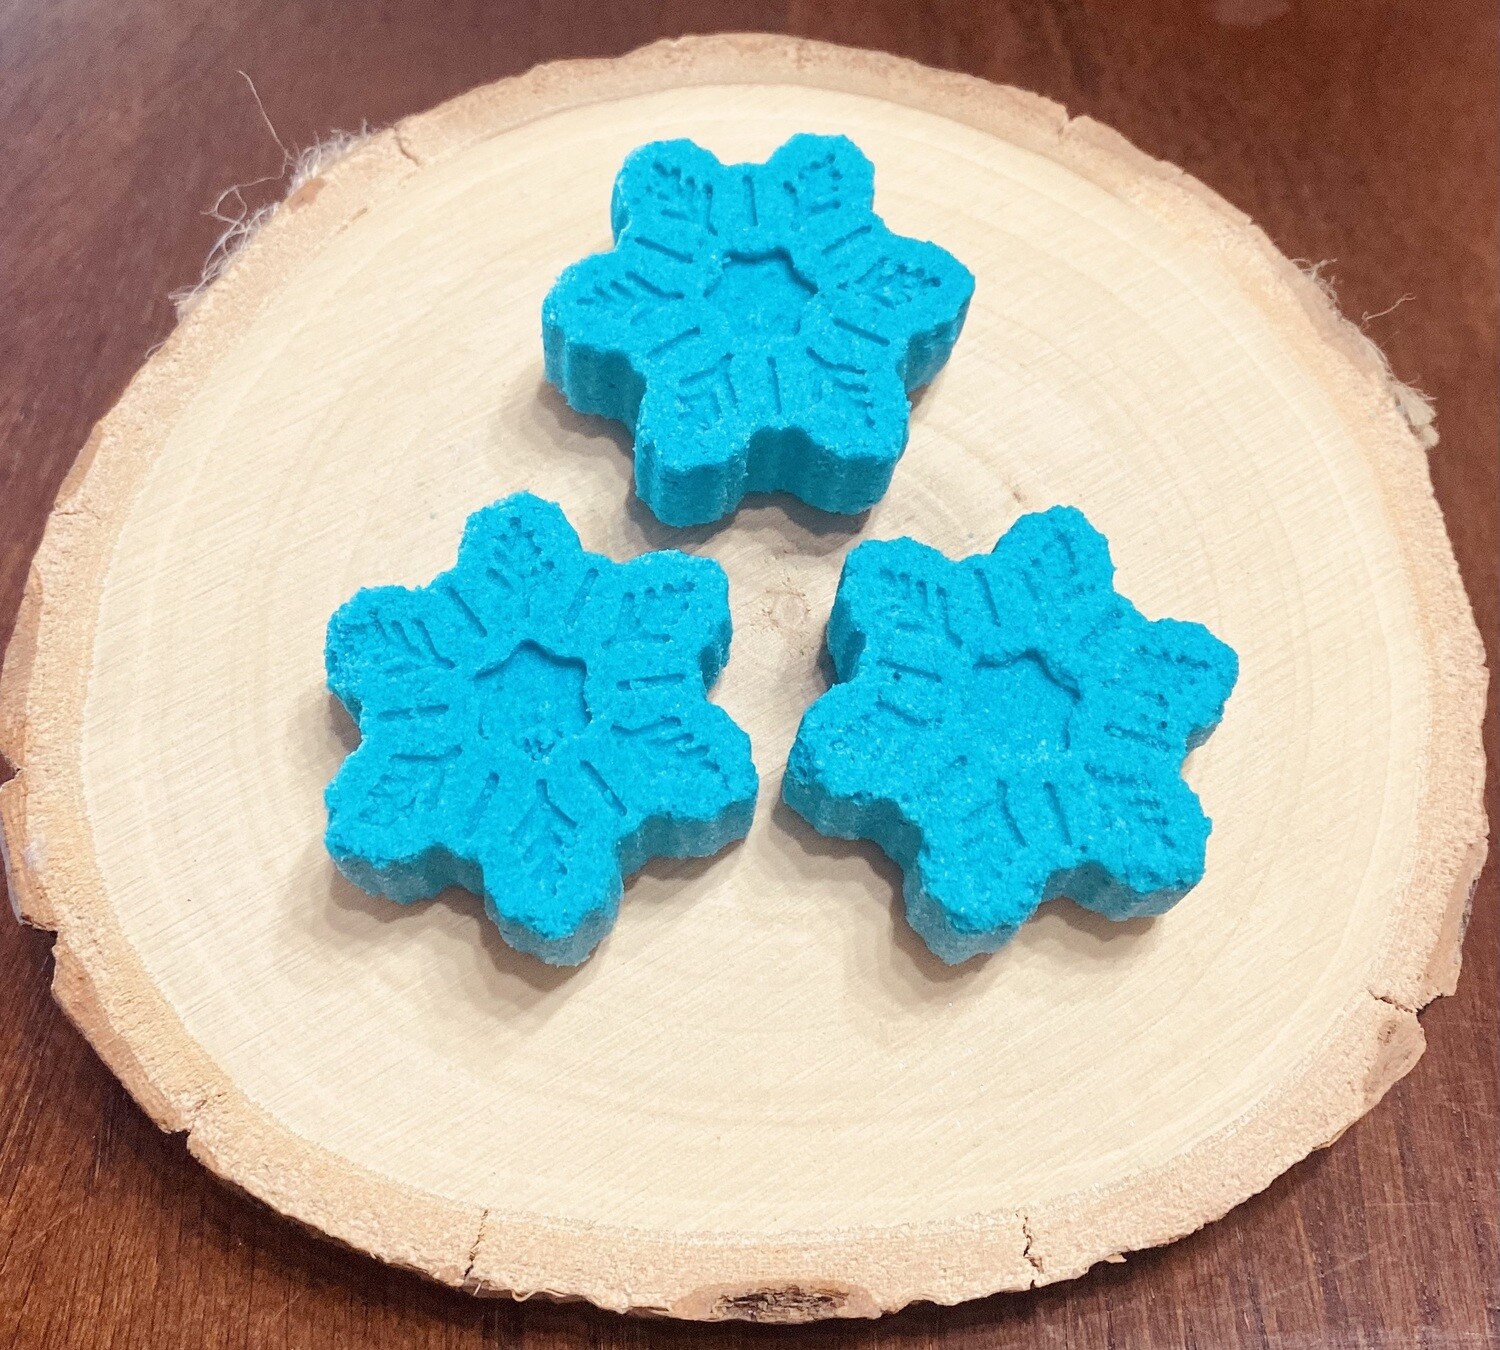 Shower Steamers (Menthol and Eucalyptus) (Limited number left) (Pk of 2 steamers) teal color, (Seasonal, after these are gone, more will be back in the Fall)